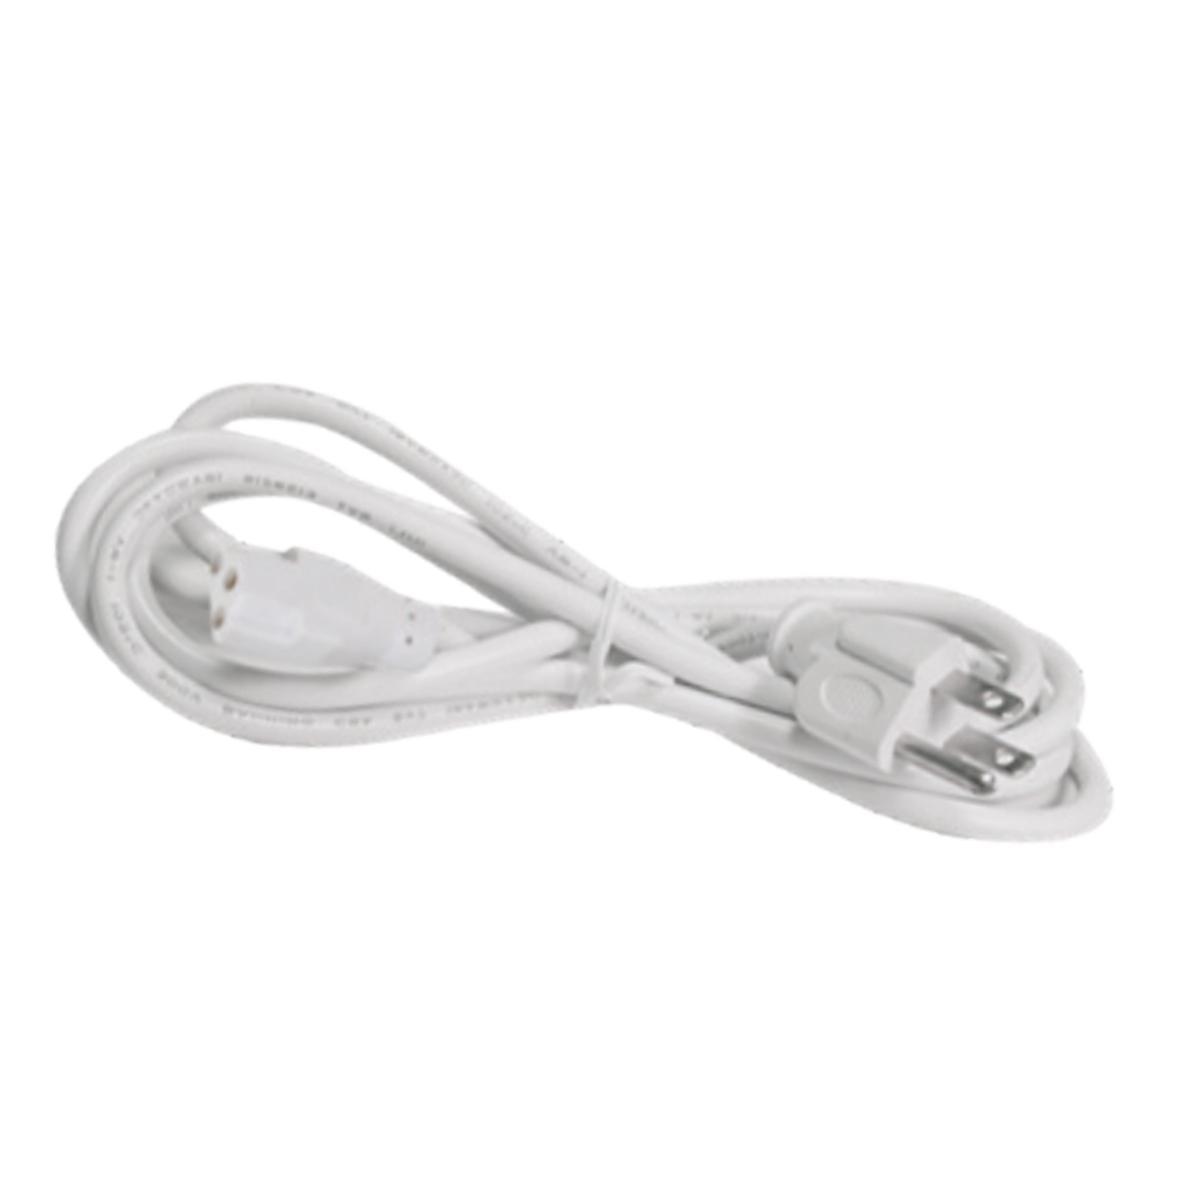 6ft Power Cable with 120V AC plug for LED 5 Complete Task Lights, White